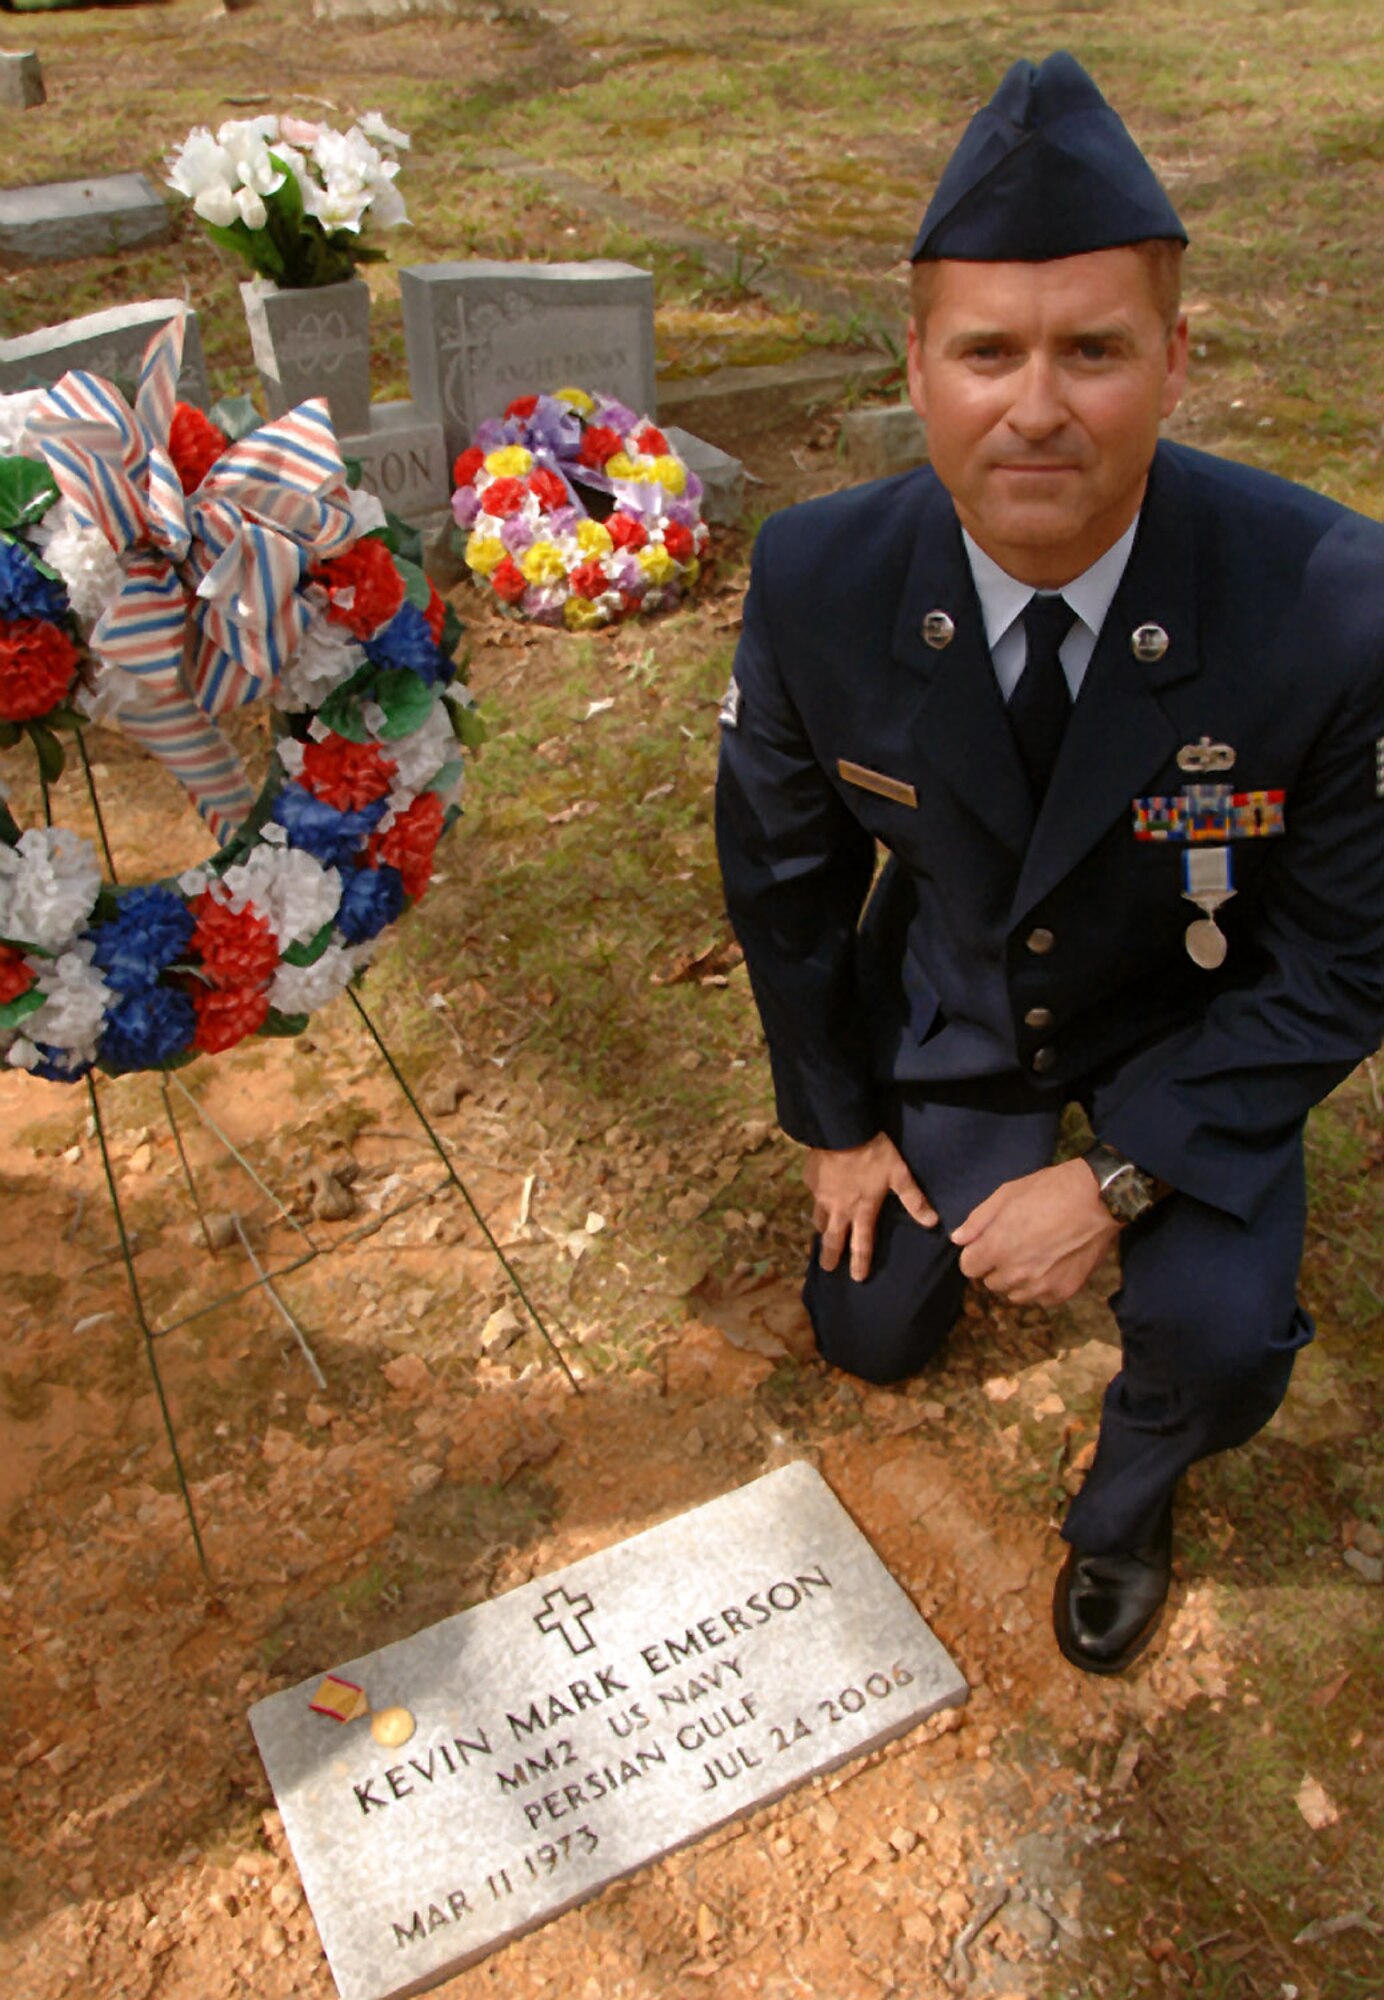 Staff Sgt. Jay Rosenberry visits the gravesite of his friend Kevin Mark Emerson in Jetersville, Va., April 11. Sergeant Rosenberry was awarded the Coast Guard Silver Lifesaving medal, and Emerson was posthumously awarded the Gold Lifesaving Medal for the heroic rescue of three young children caught in a riptide while vacationing in the Outer Banks of North Carolina in July 2006. Emerson died as a result of his heroic actions. (U.S. Coast Guard photo/Petty Officer 2nd Class Christopher Evanson) 